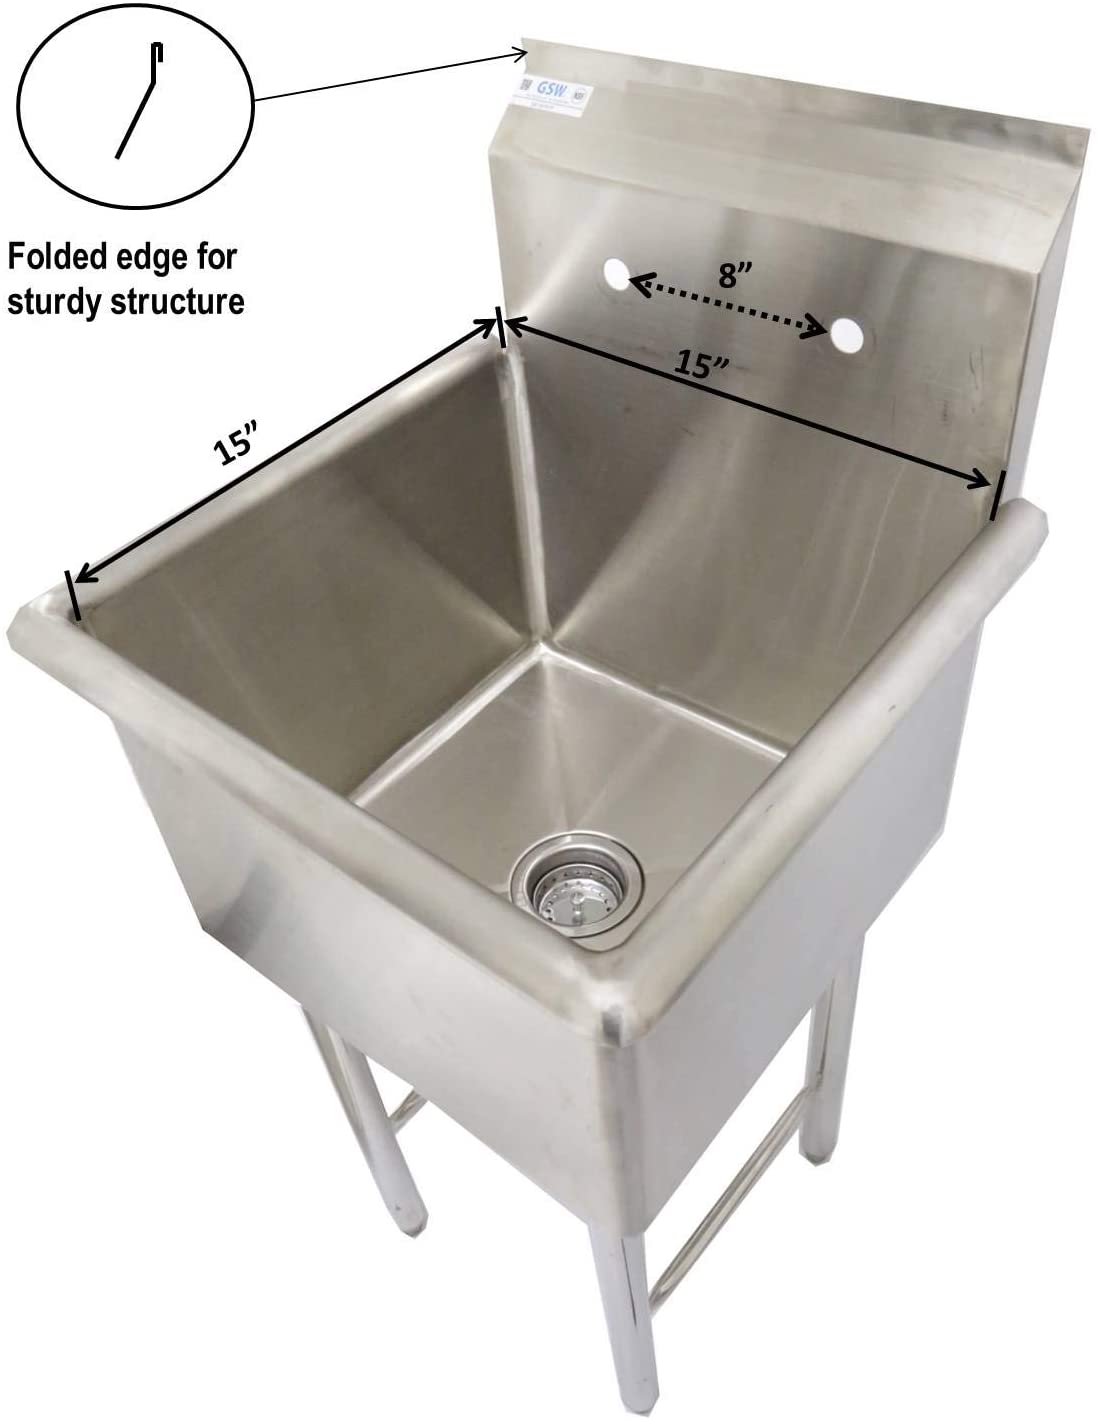 GSW 1 Compartment Stainless Steel Commercial Food Preparation Sink w/ Crossing Bar on Legs ETL Certified (15"x15" Tub + Faucet))